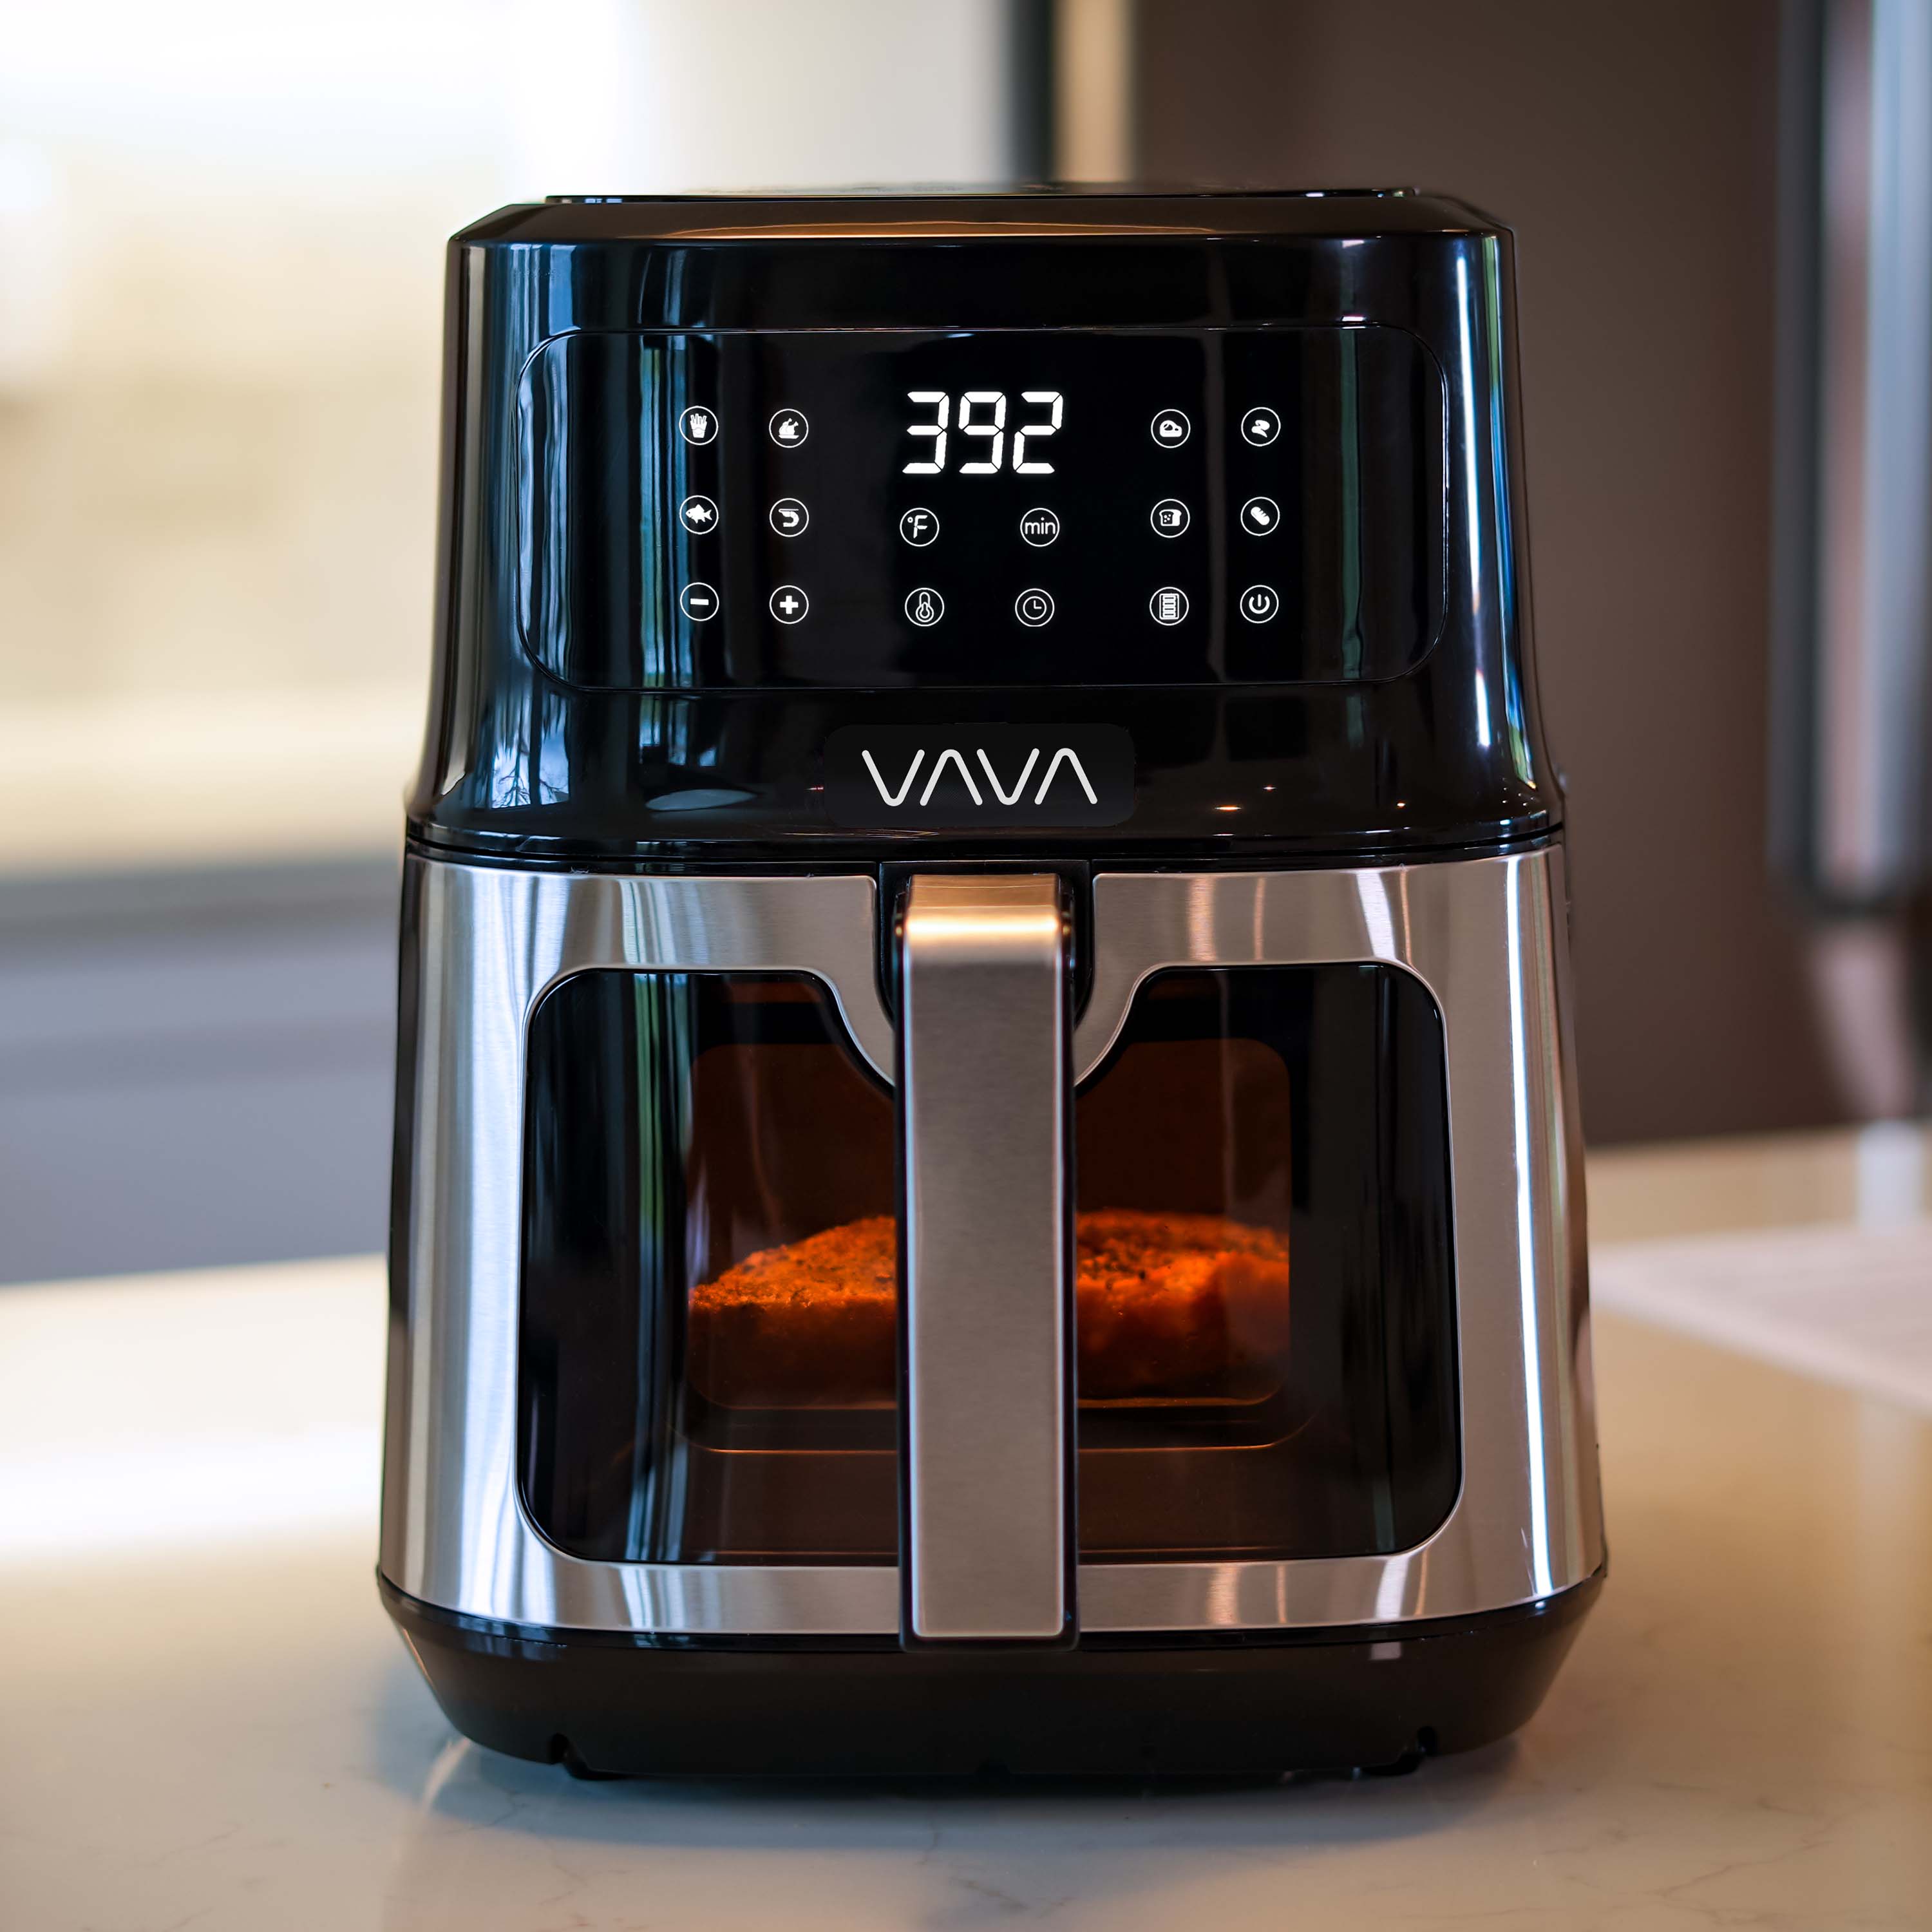 VAVA air fryer with a steak cooking inside the basket